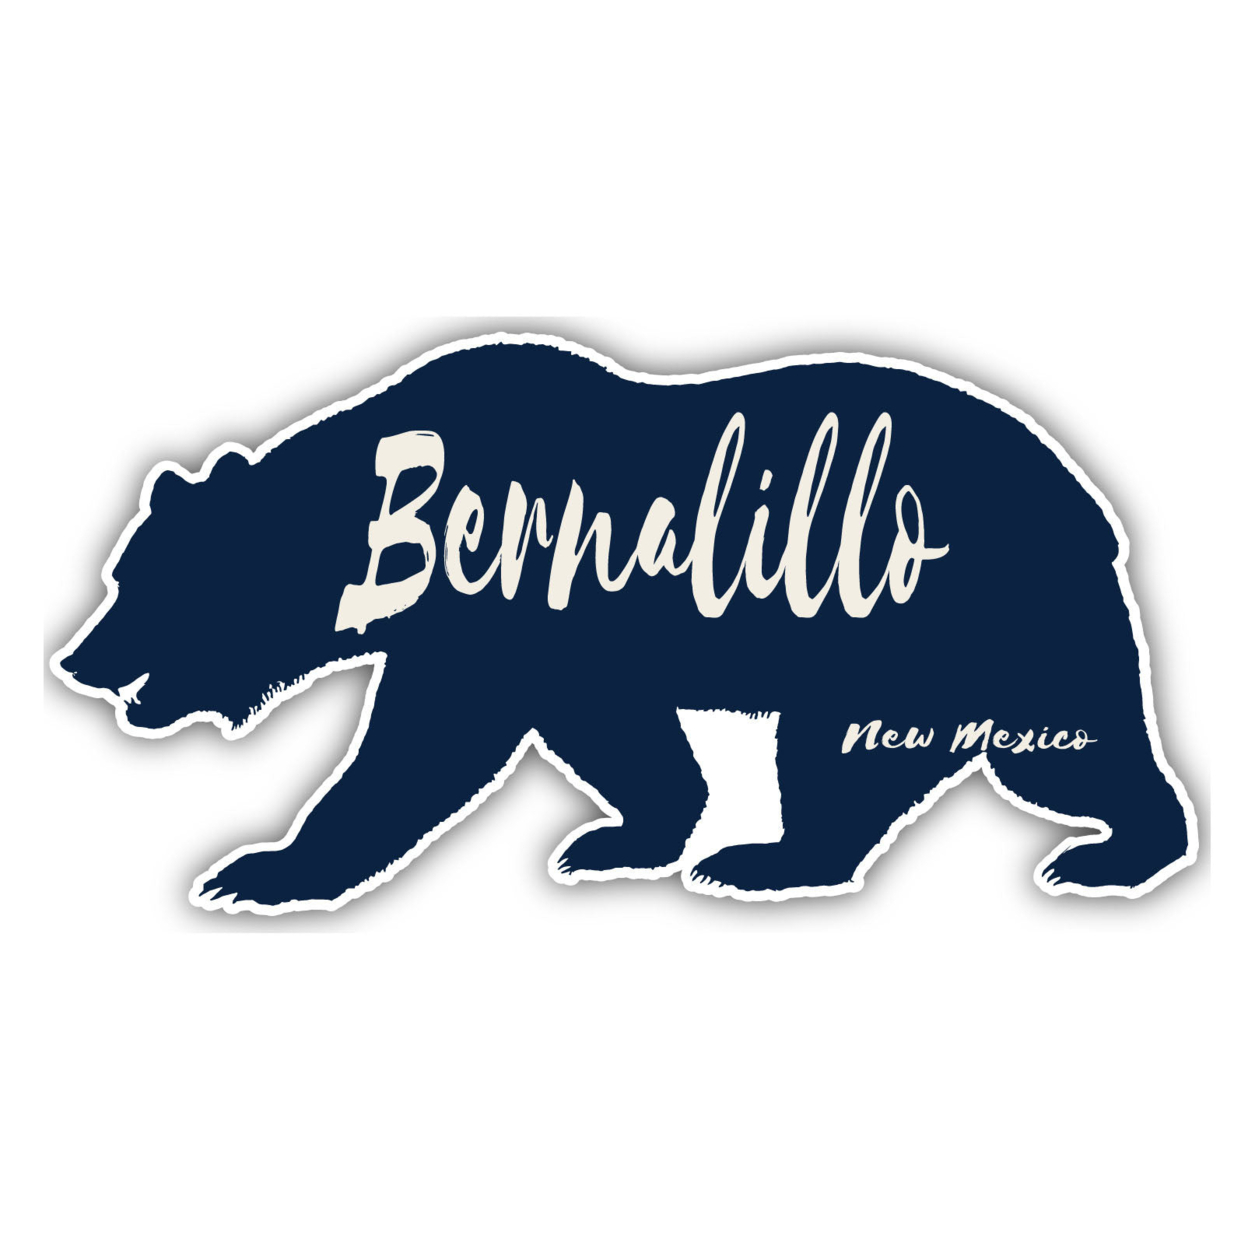 Bernalillo New Mexico Souvenir Decorative Stickers (Choose Theme And Size) - 4-Pack, 4-Inch, Tent